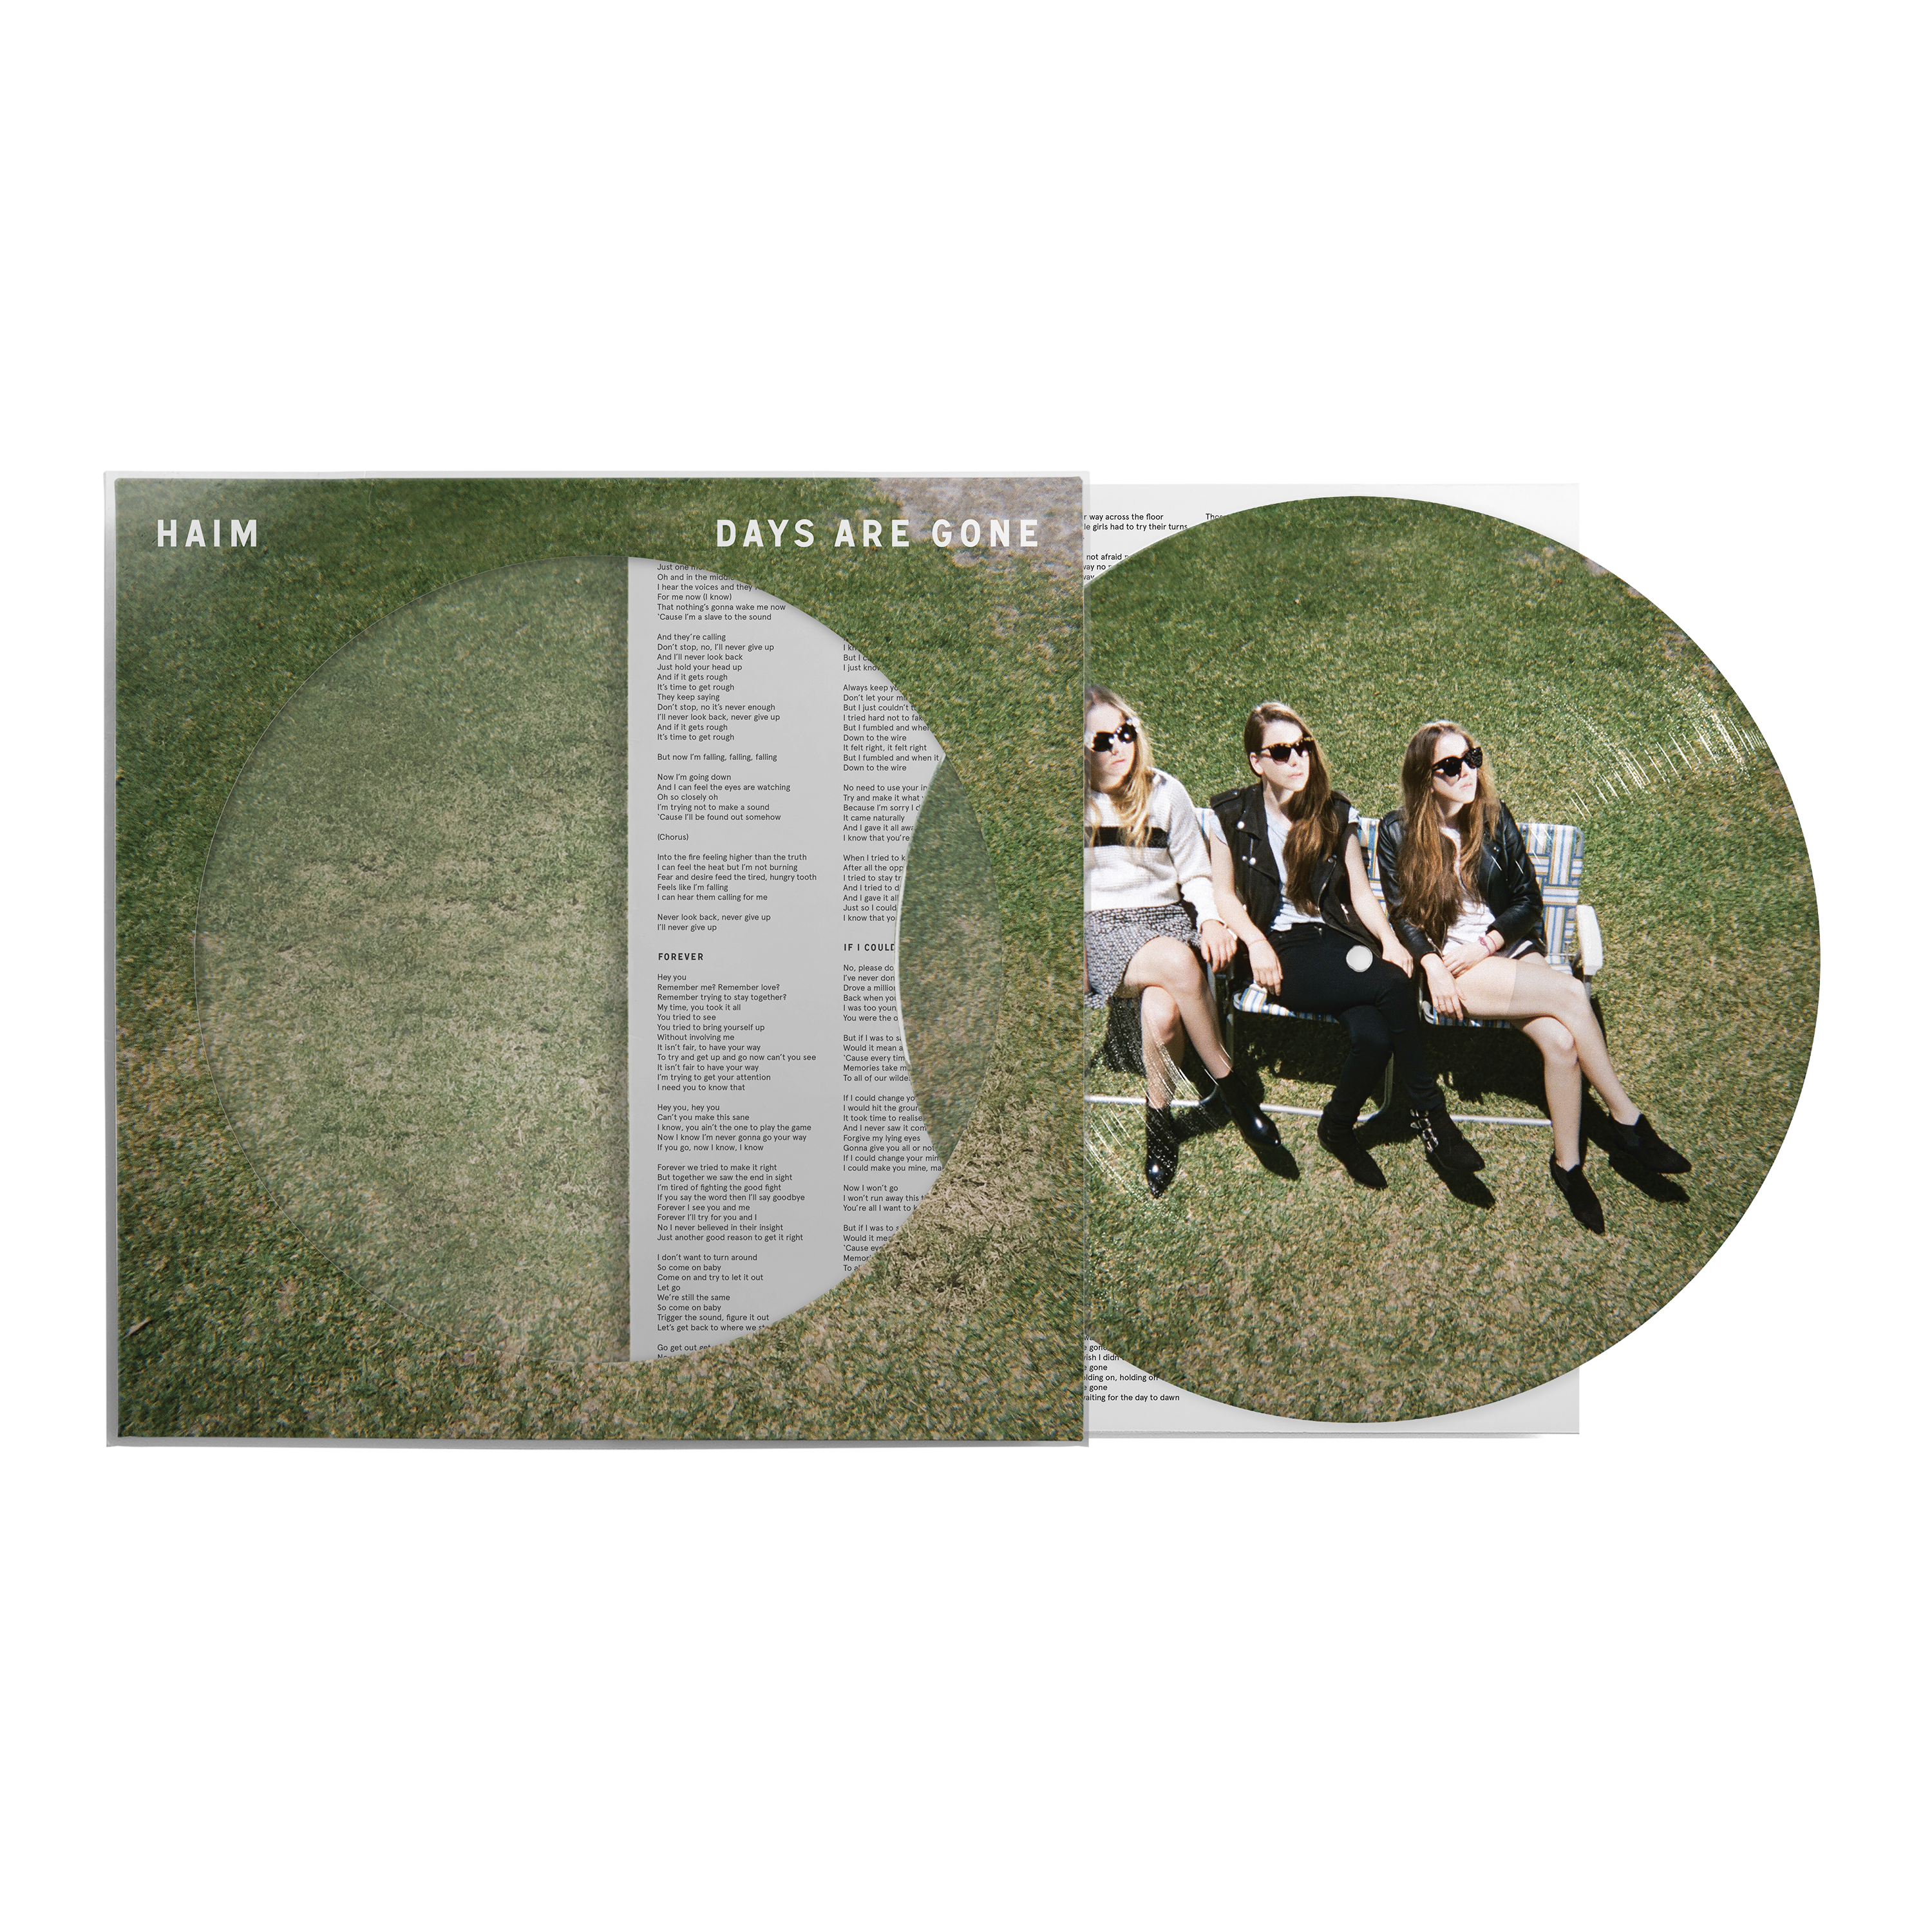 Days Are Gone (10th Anniversary): Picture Disc Vinyl LP + Signed Art Card